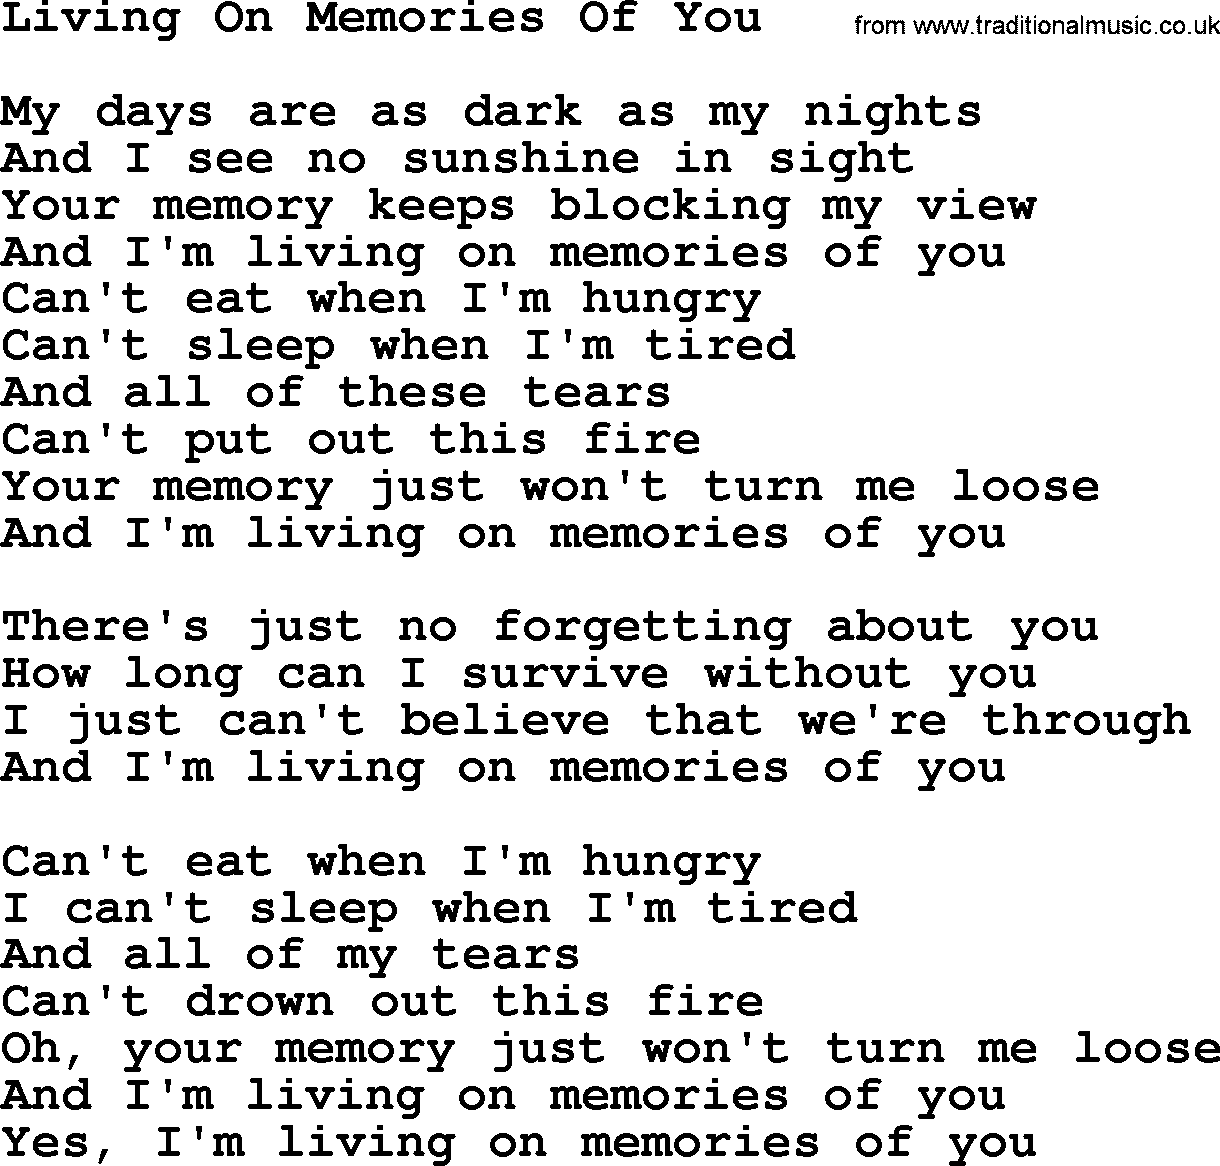 Dolly Parton song Living On Memories Of You.txt lyrics